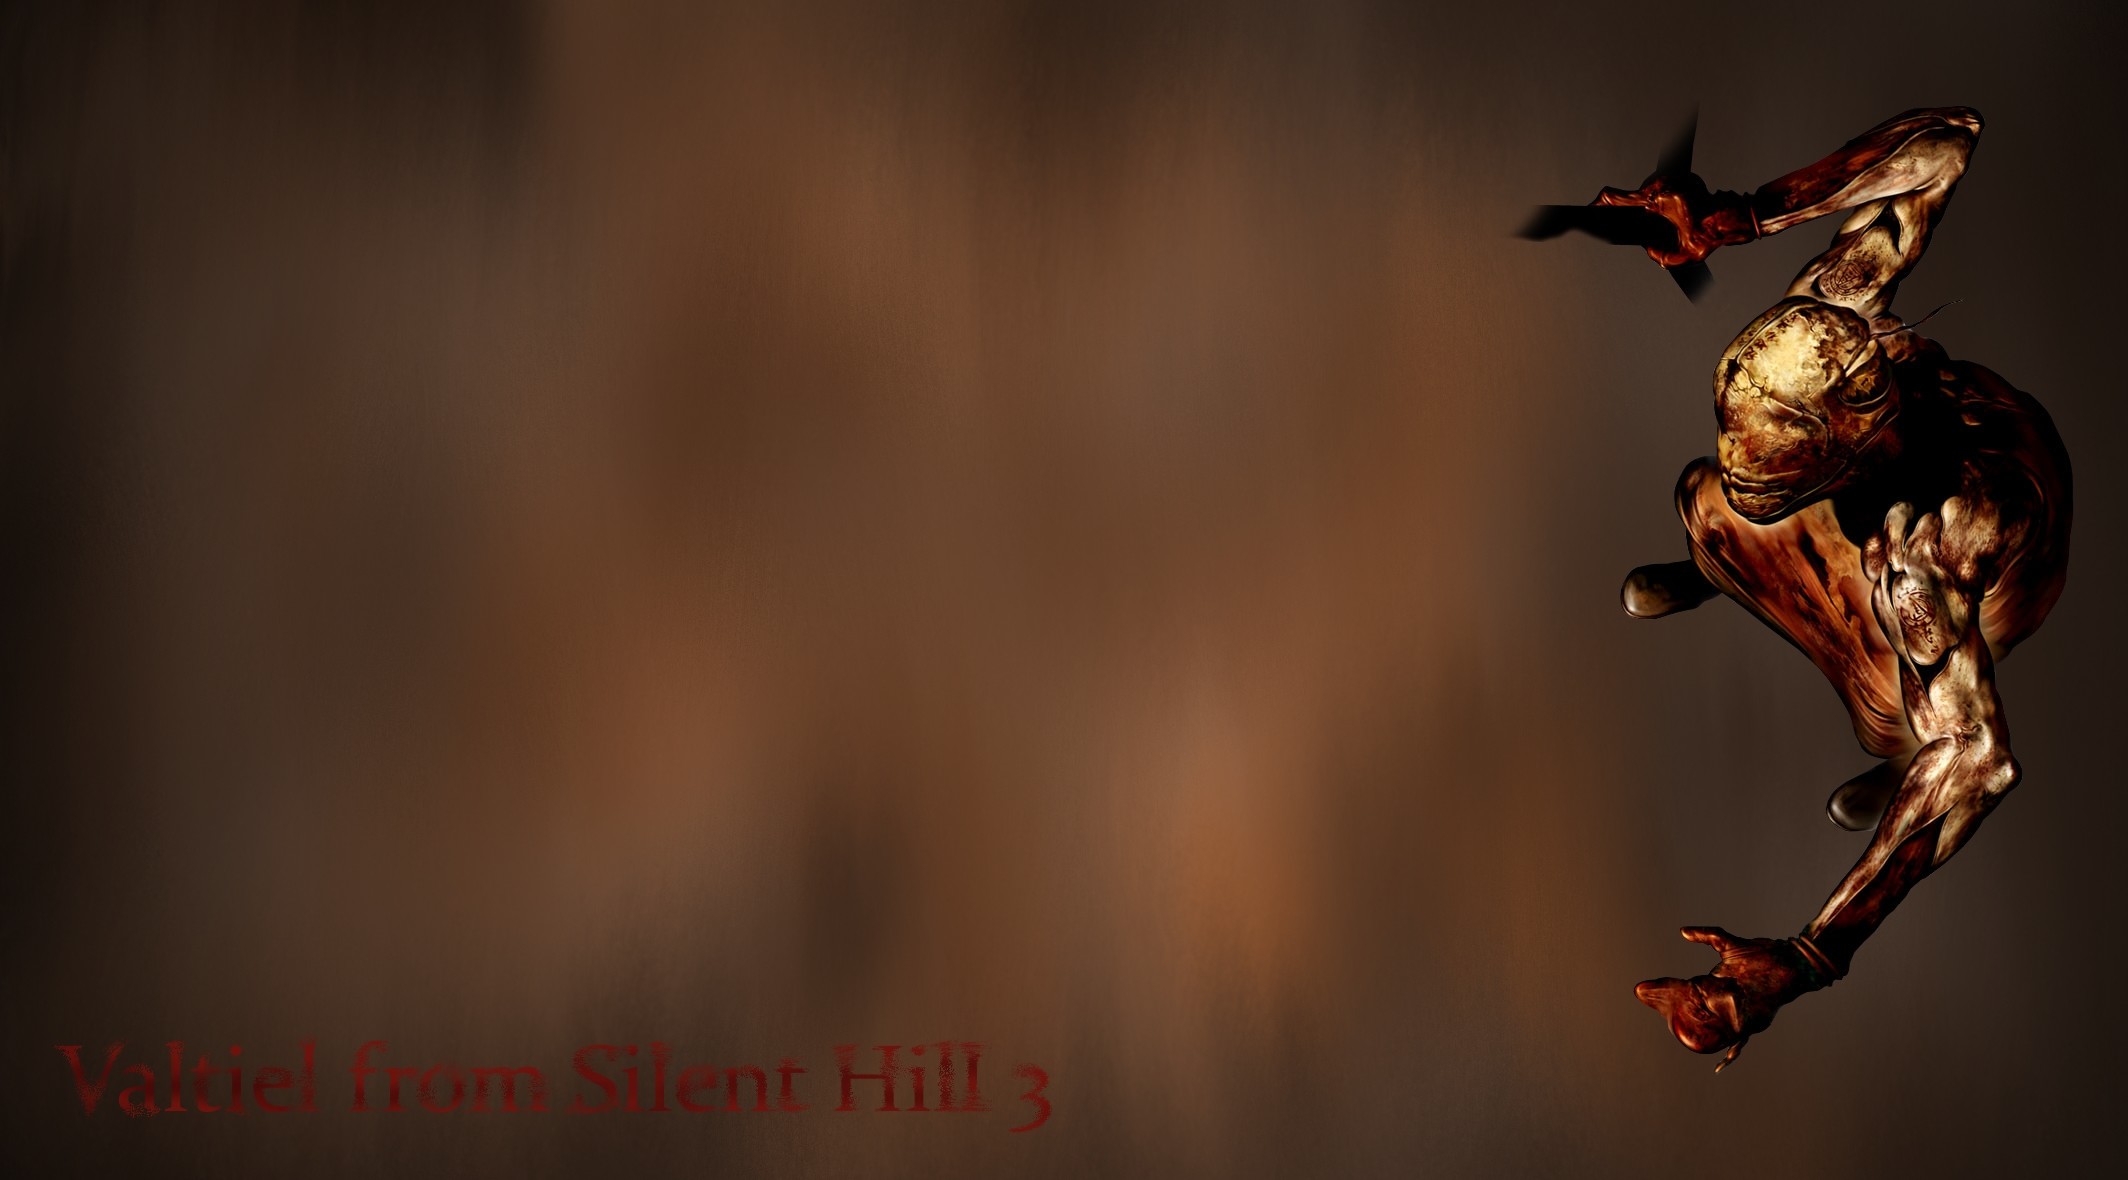 Valtiel From Silent Hill 3 With Background By Schloemixi 2128x1180